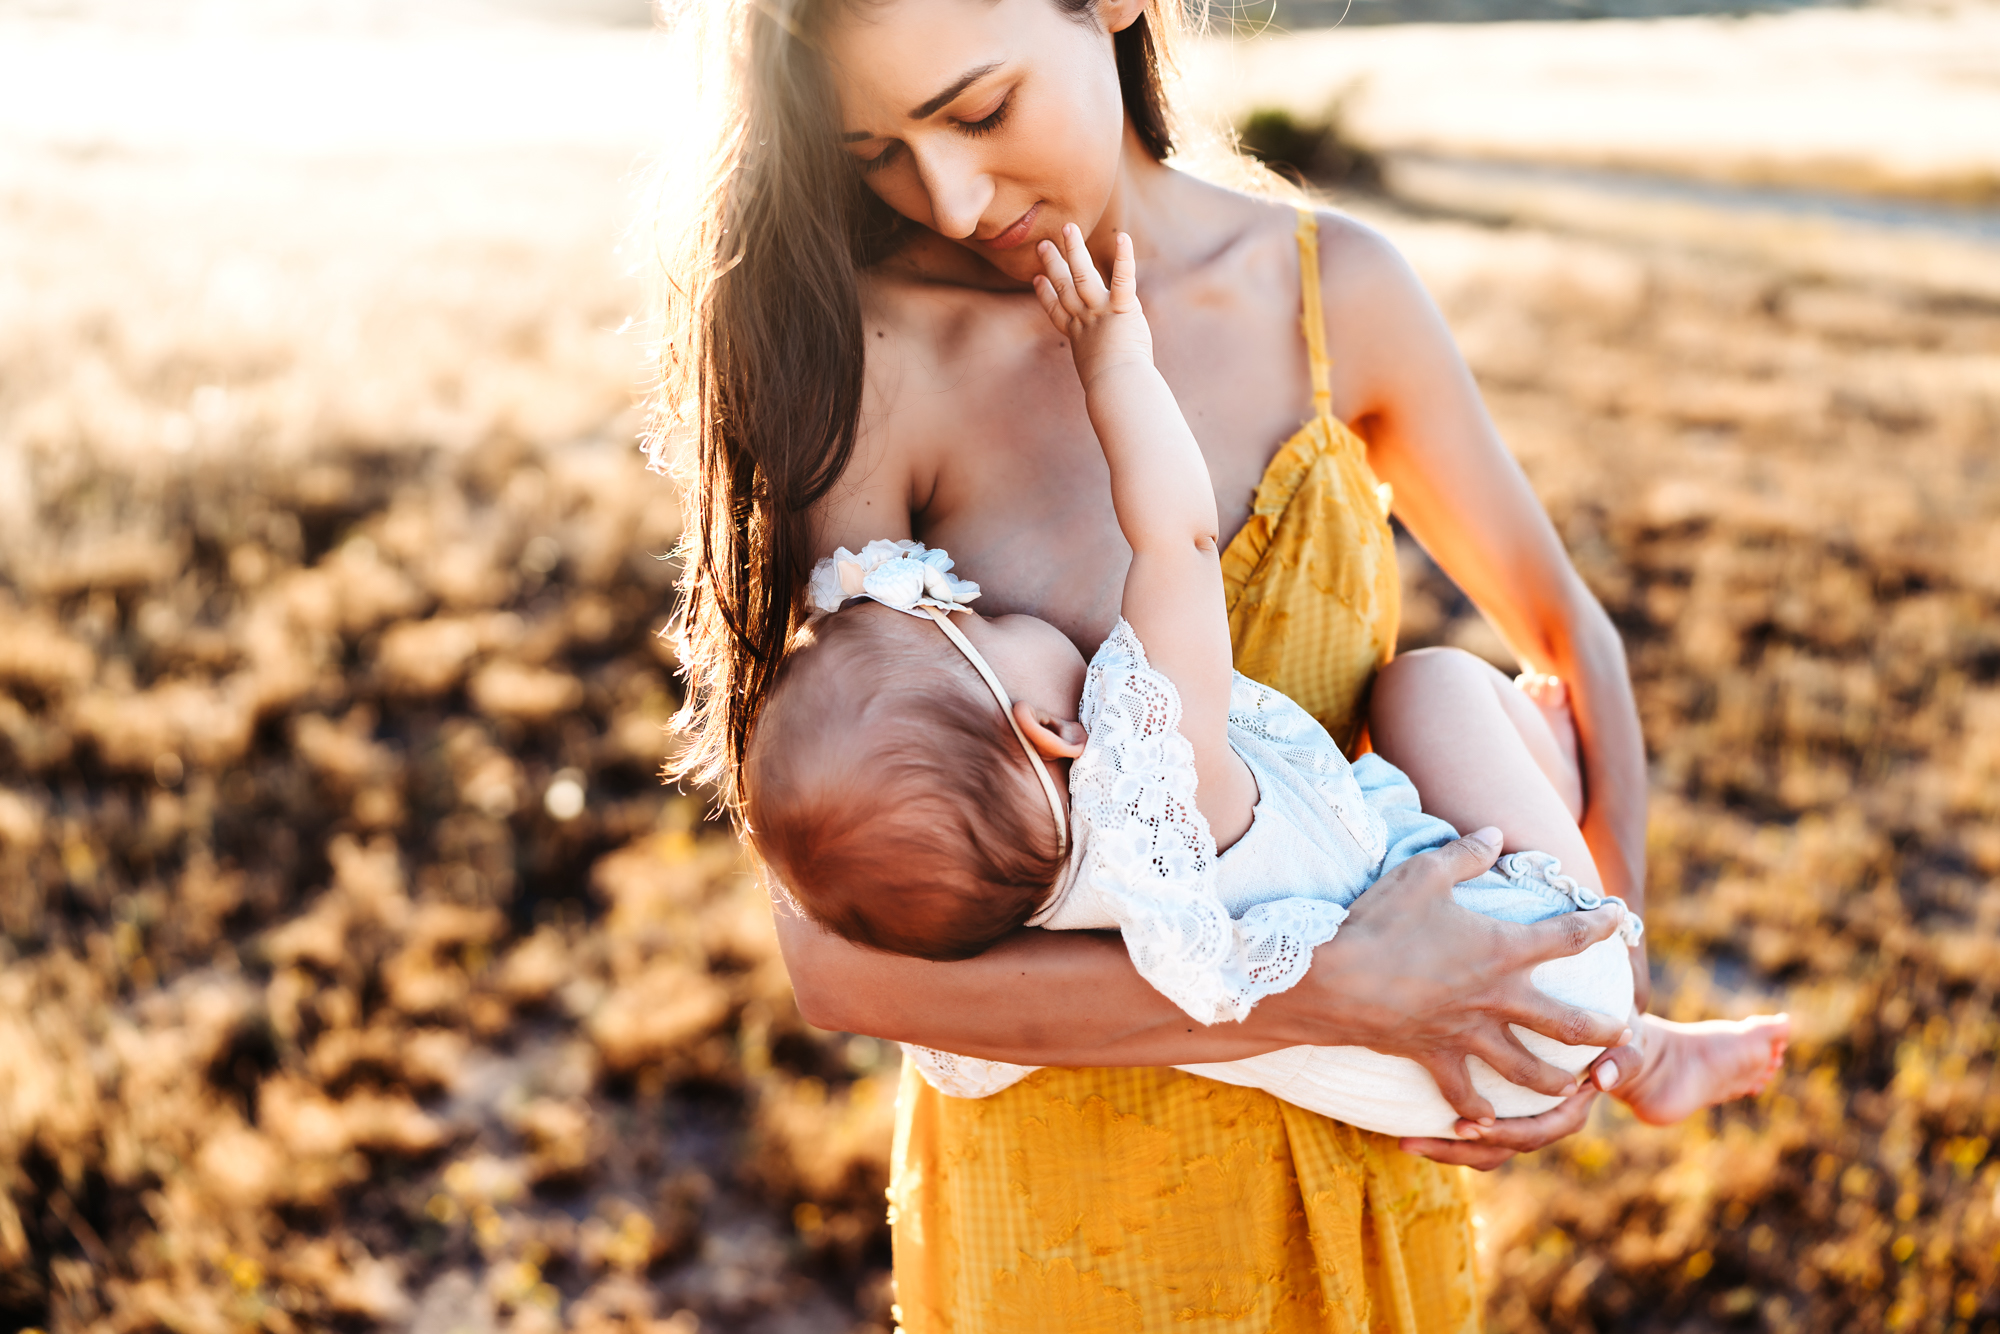 Woman wearing a yellow dress standing in a field in Mission Trails Regional Park breastfeeding her baby girl during a lifestyle family photo session by Love Michelle Photography.